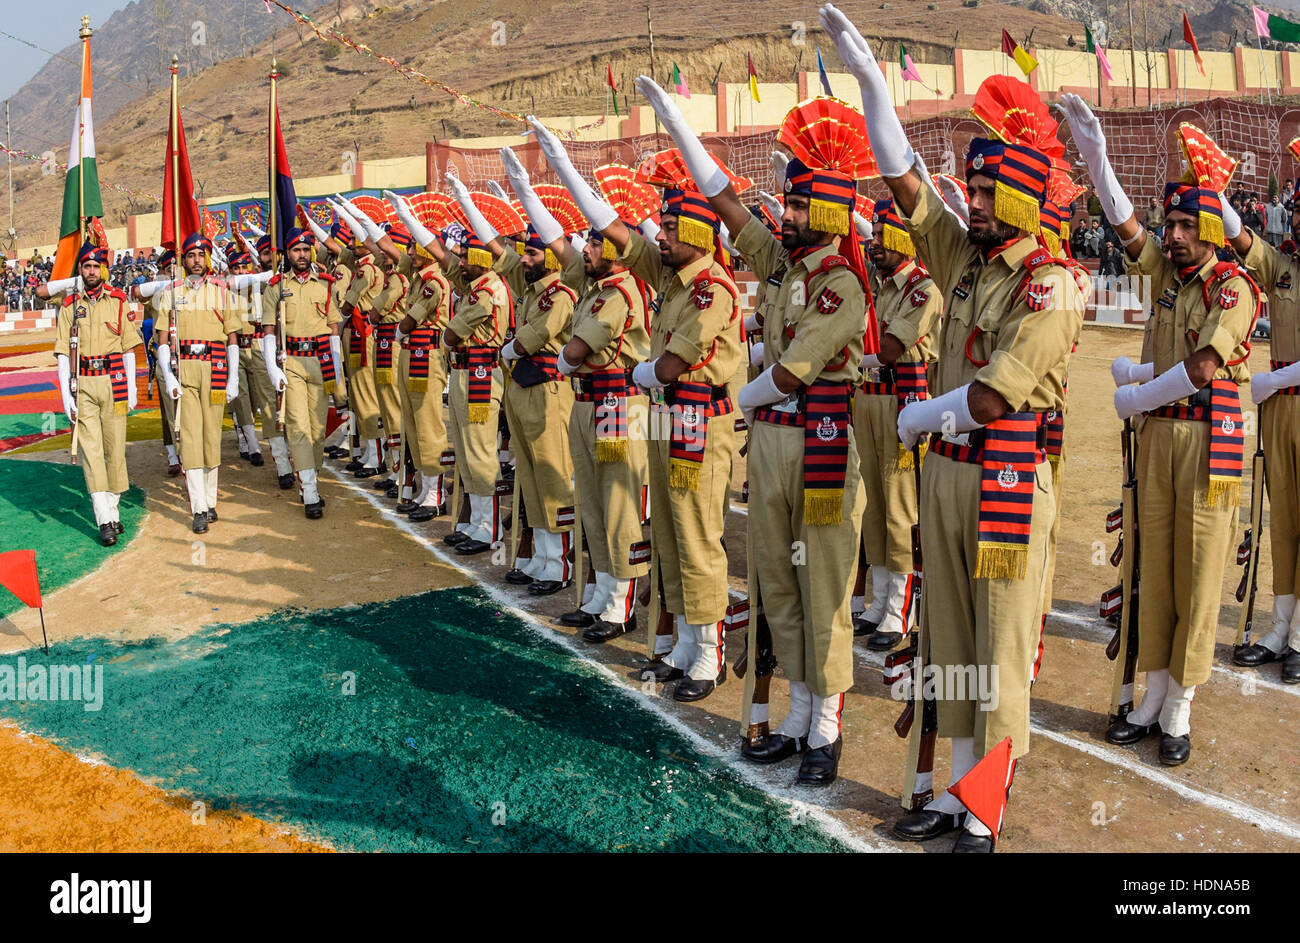 Lethpora, Jammu and Kashmir, India. 14th Dec, 2016. Jammu and Kashmir Police (JKP) men take oath during their passing-out parade on December 14, 2016 in Lethpora 25 km (15 miles) south of Srinagar, the summer capital of, Indian Administered Kashmir, India.After completing their training, nearly 355 constables of JK police took oath during their passing out parade in south Kashmir's Pulwama District. The year-long rigourous training involves physical training, weapons handling, and lessons in counter-insurgency operations among other things. Credit:  ZUMA Press, Inc./Alamy Live News Stock Photo